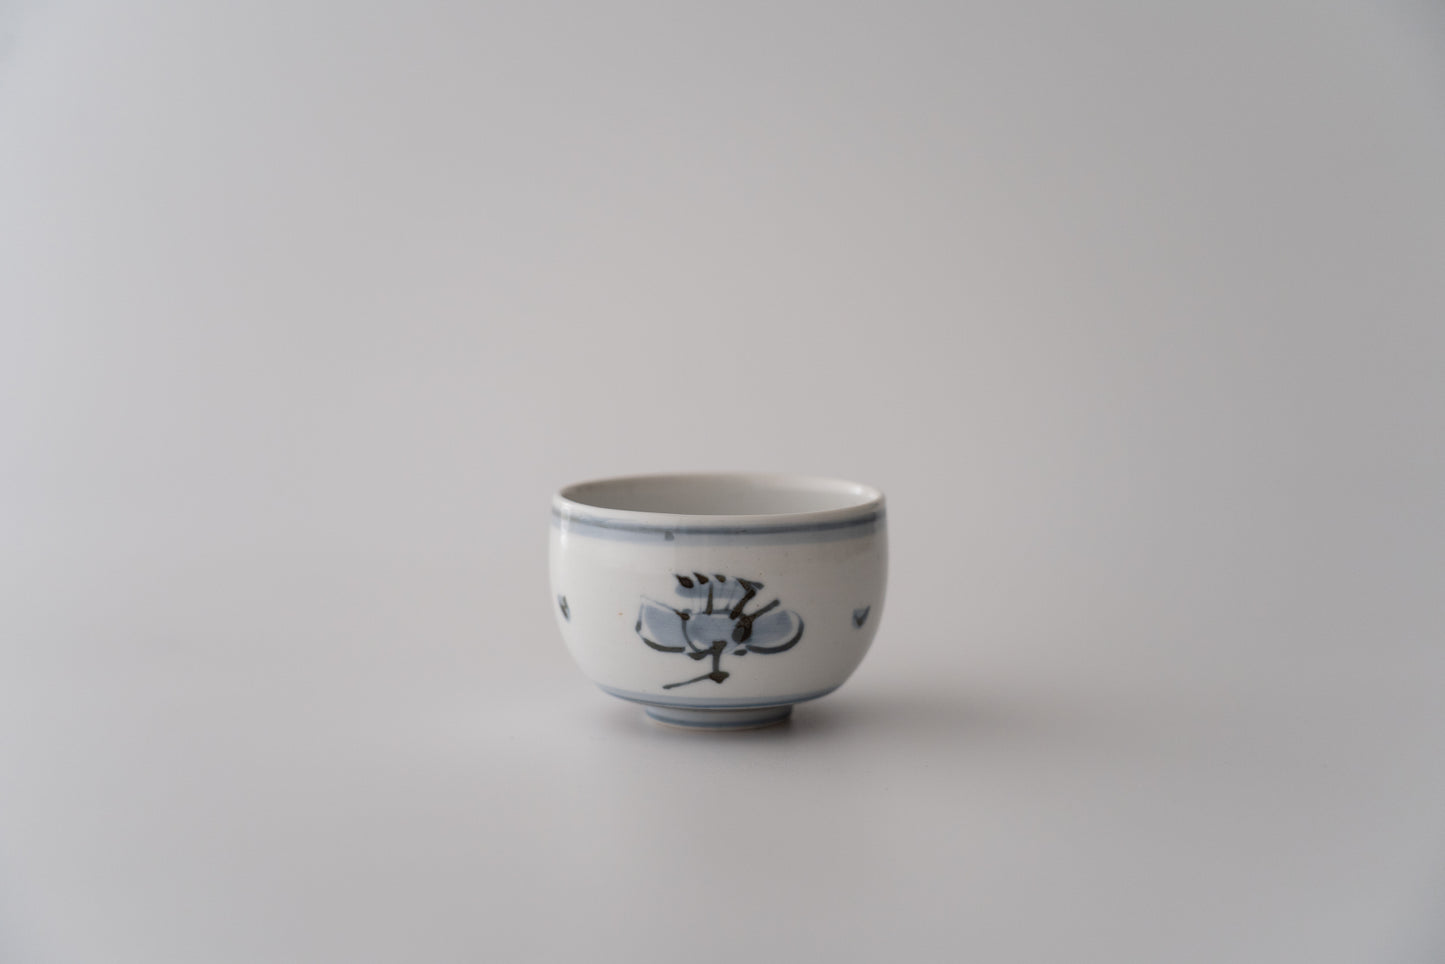 Kenkichi Tomimoto, A set of five sencha tea cup with plum design and iron painting